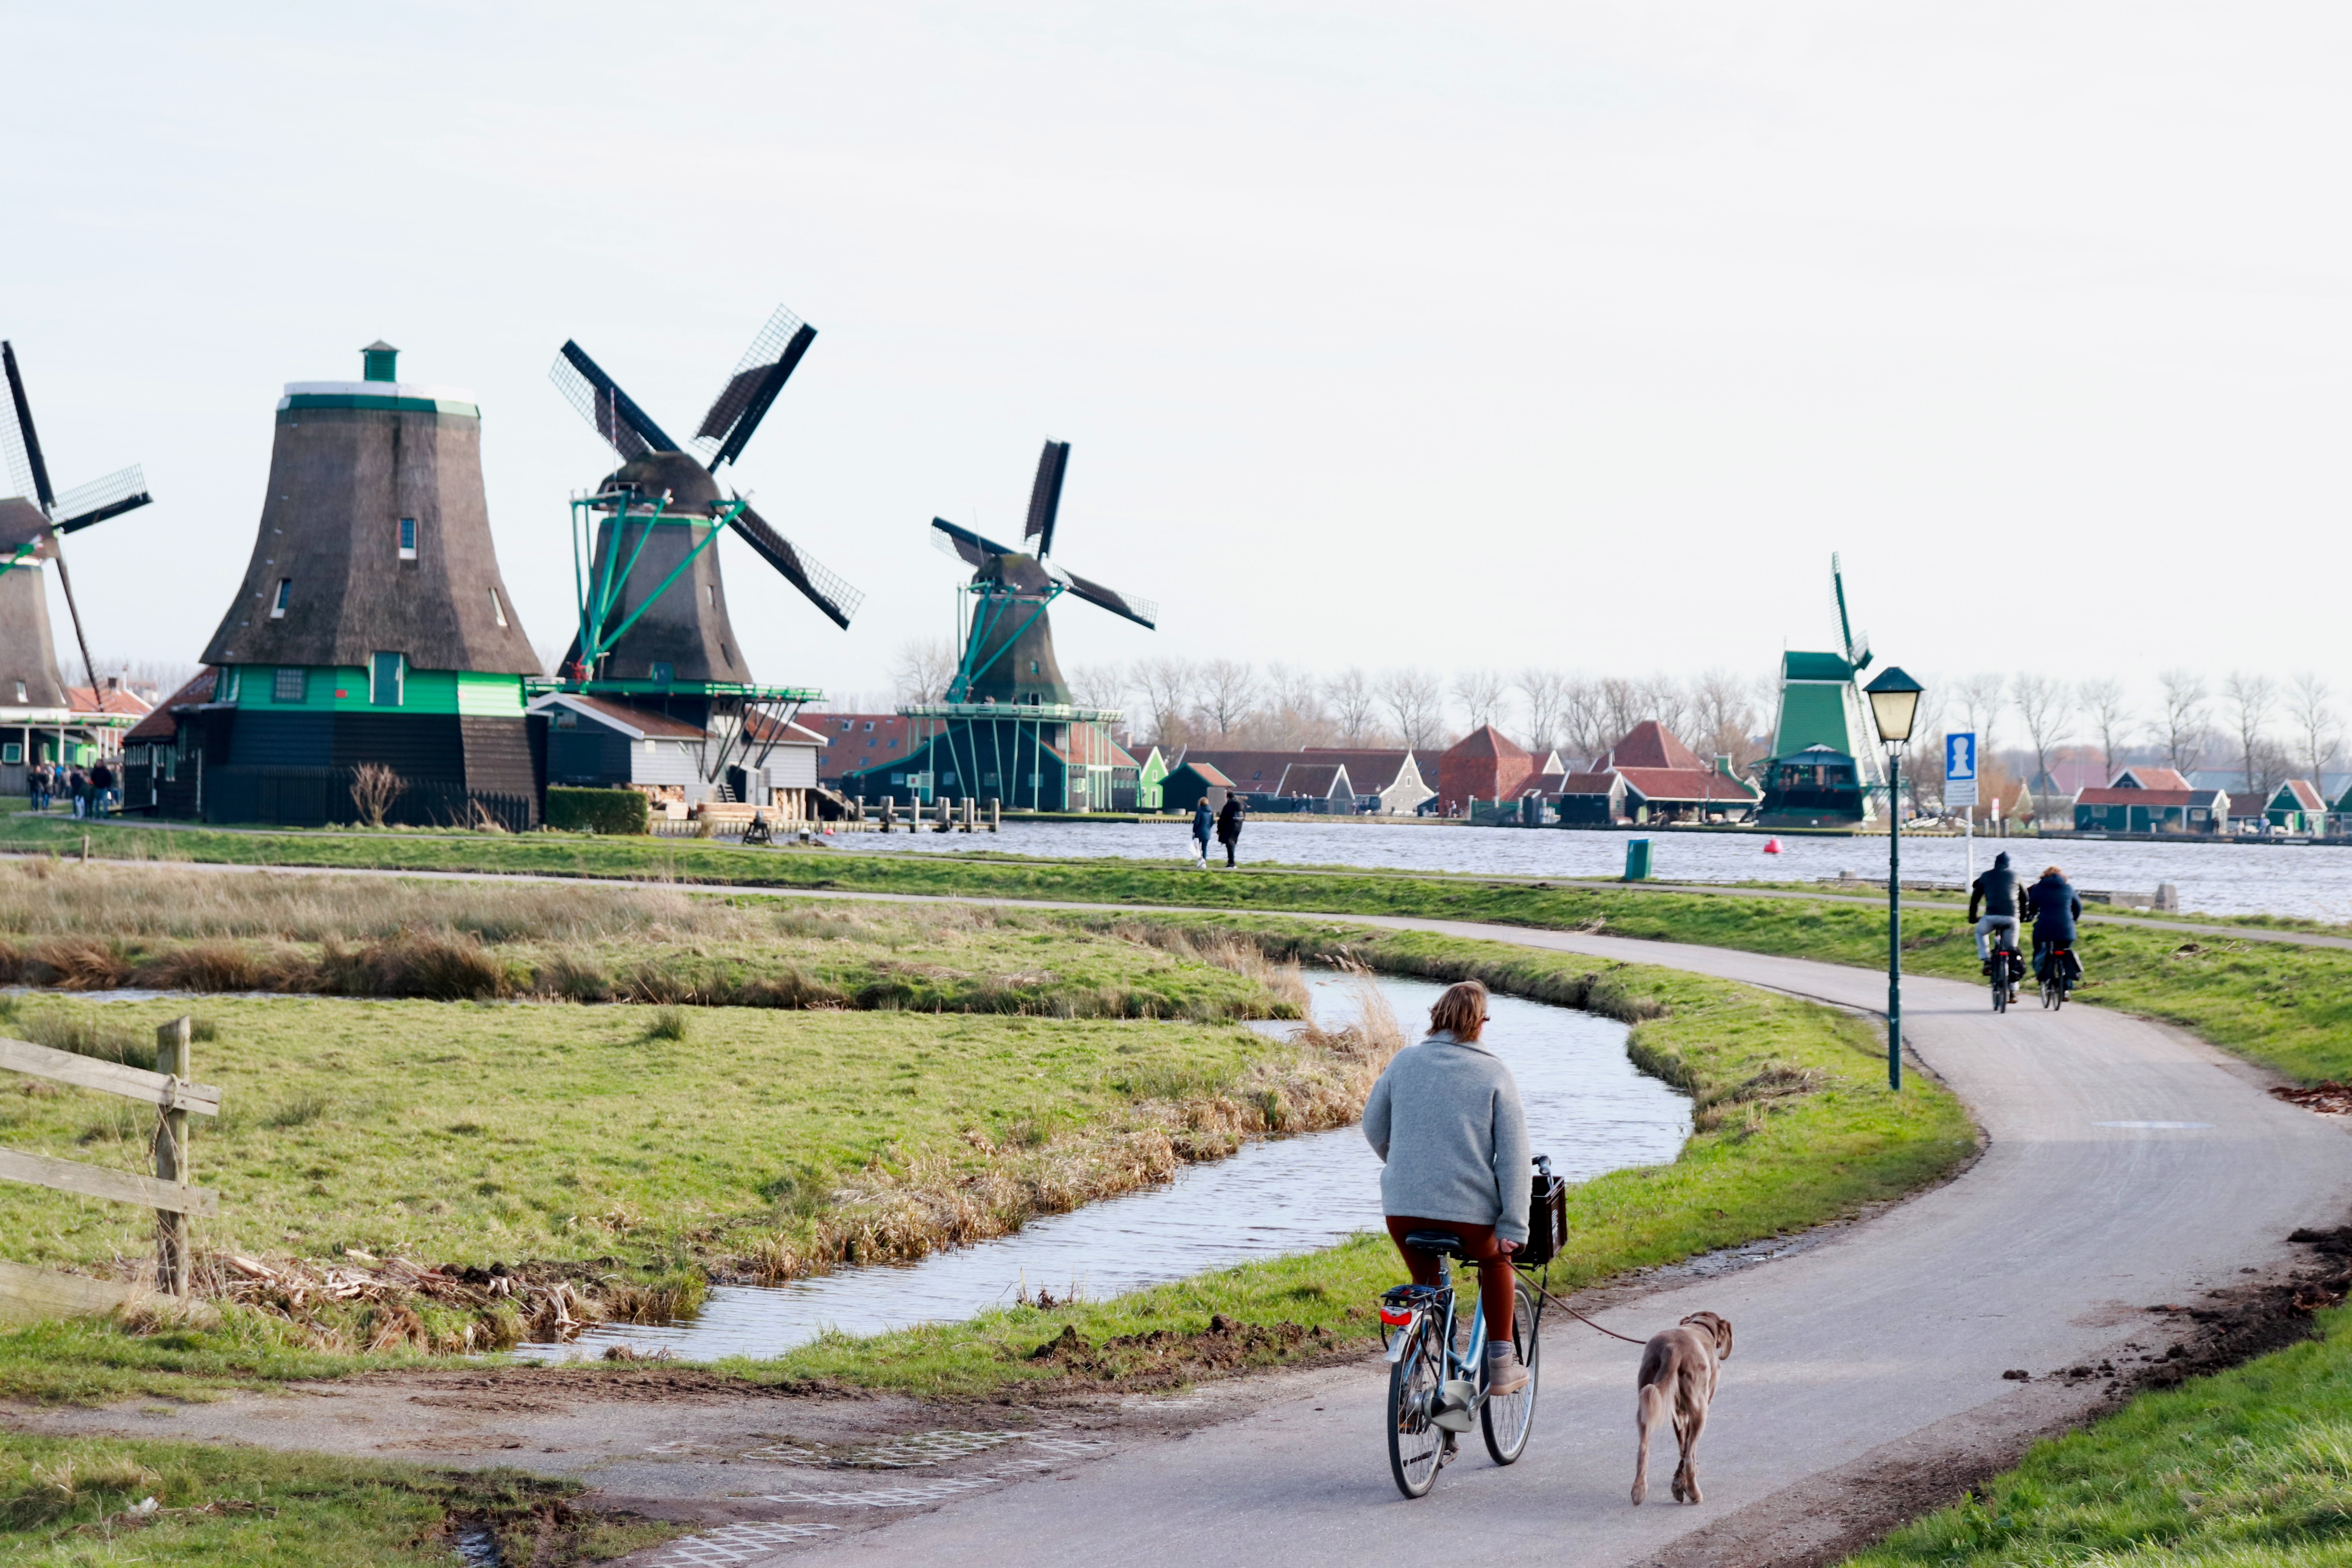 Lady cycling with her dog, windmills in a landscape